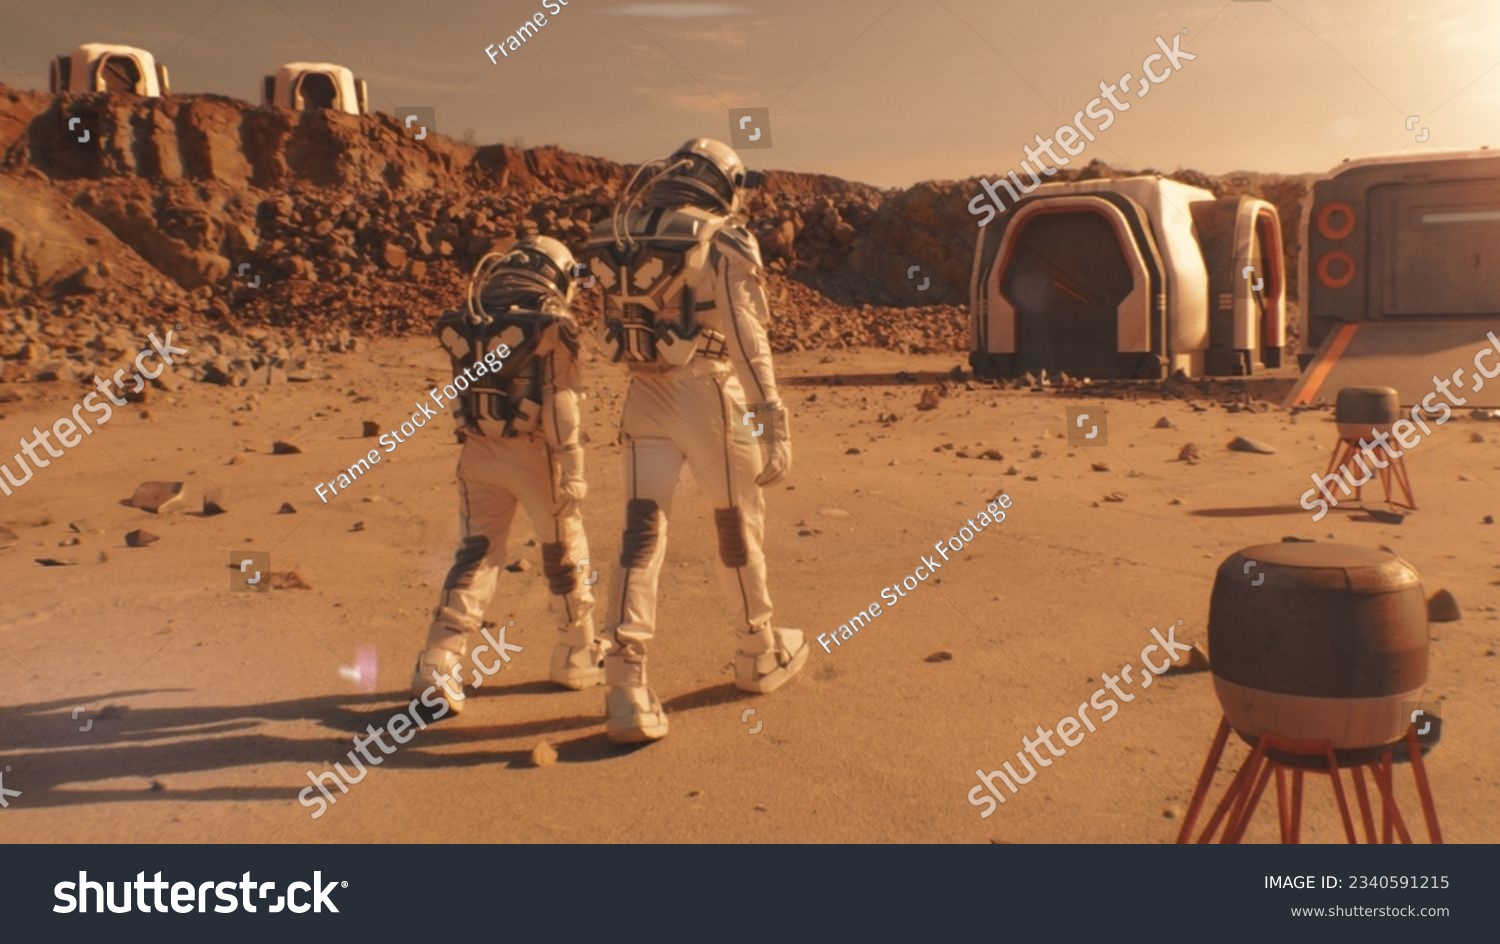 Two astronauts in spacesuits walk toward research station, colony or scientific base on Mars. AI powered rover rides in the background. Space mission. Futuristic colonization and exploration concept. #2340591215